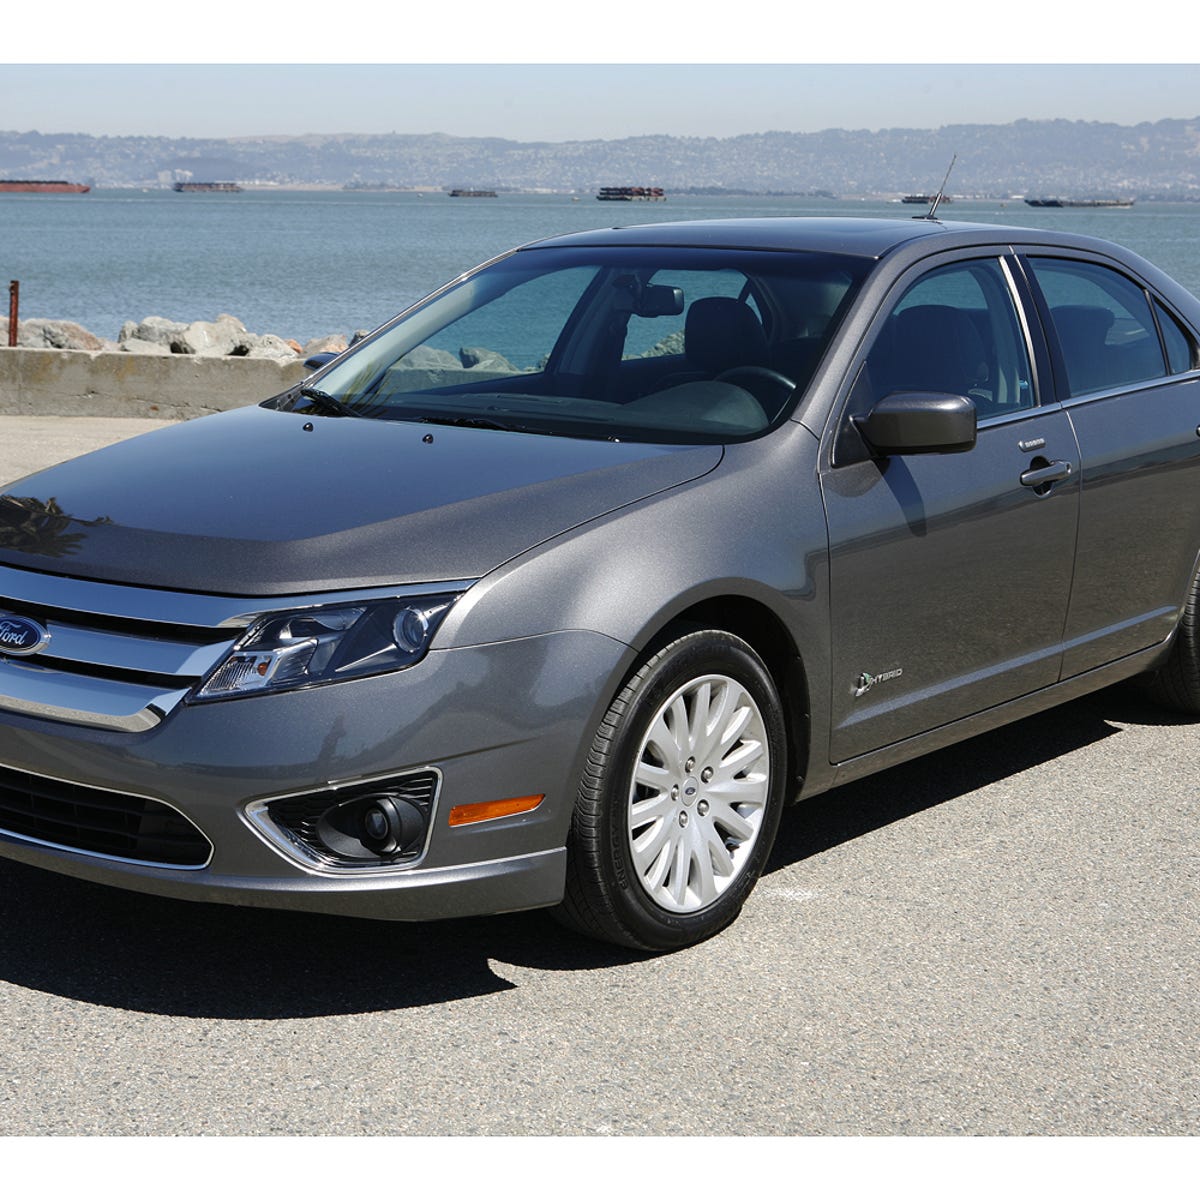 2010 Ford Fusion Hybrid review: 2010 Ford Fusion Hybrid - CNET